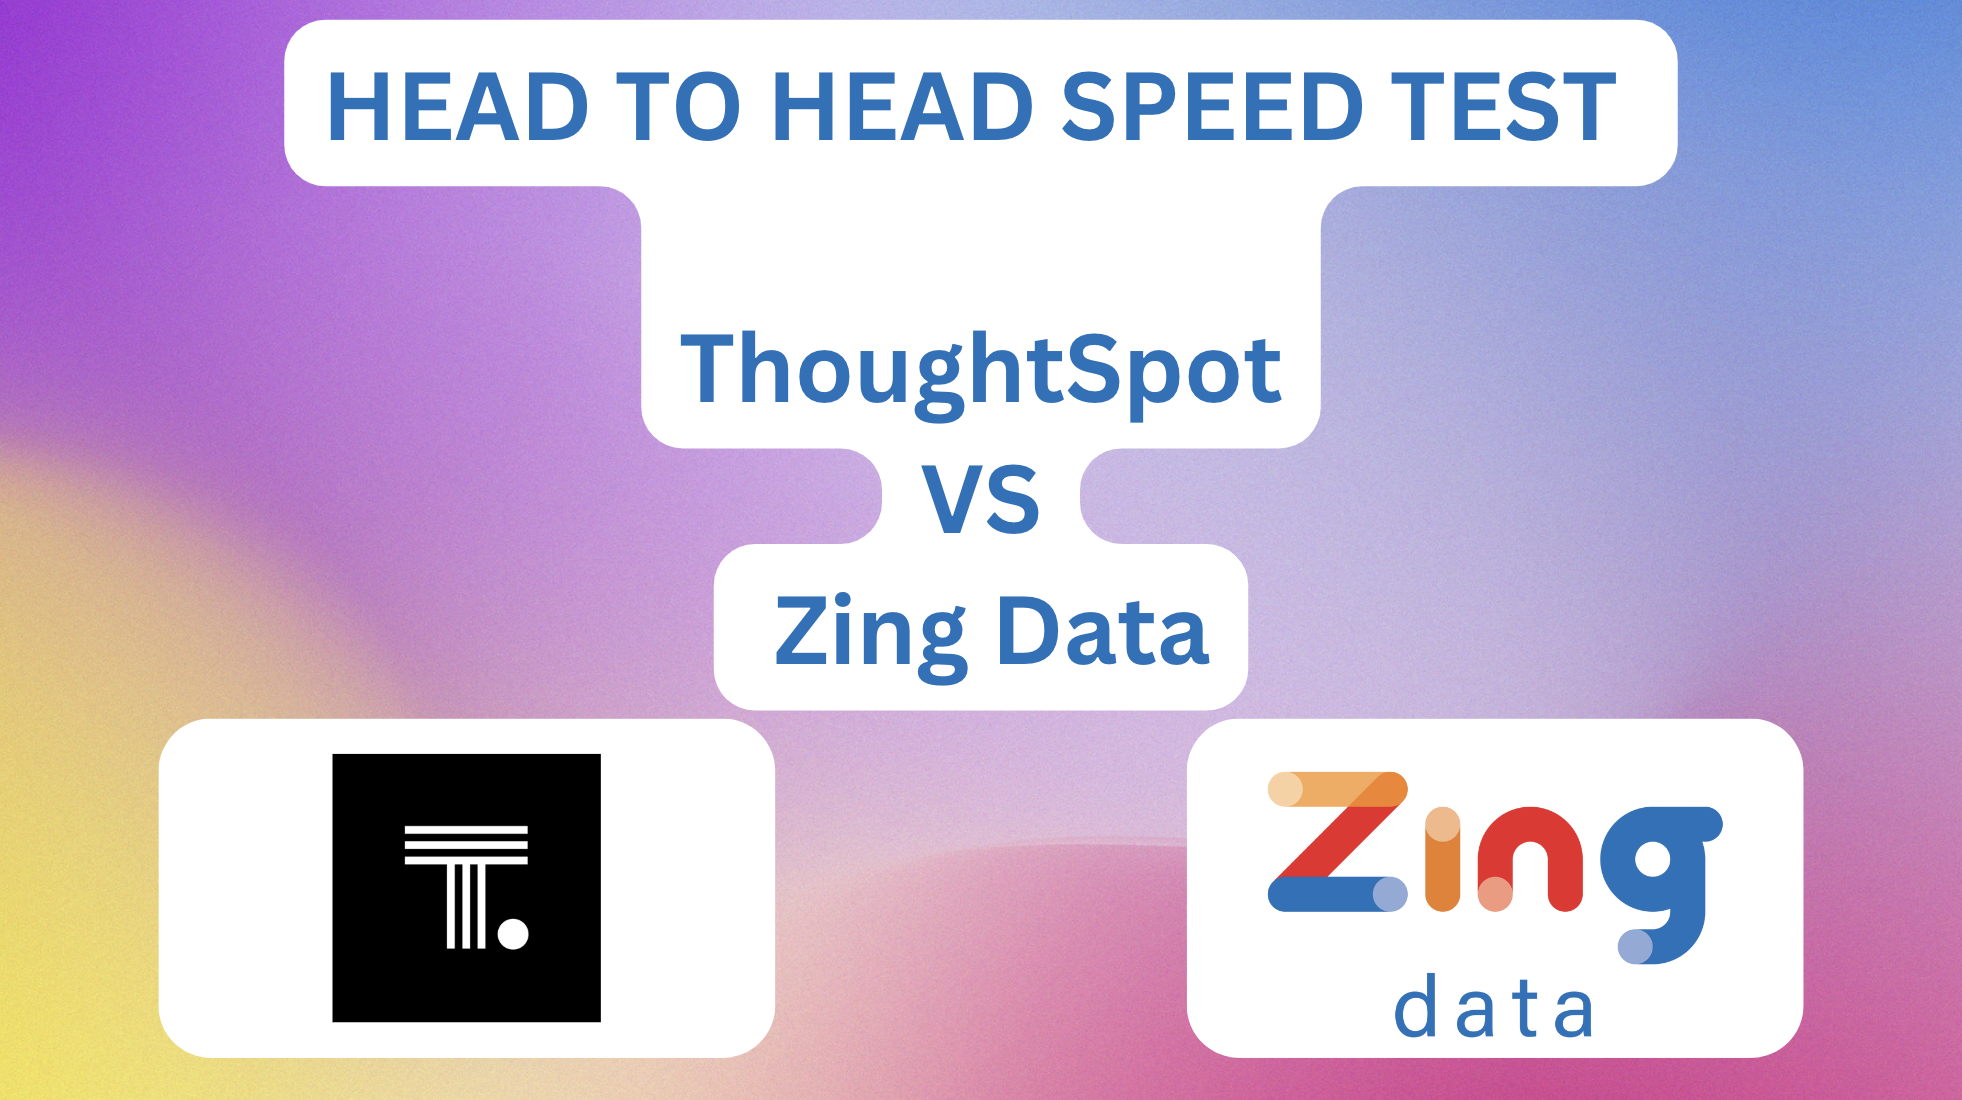 Zing vs. ThoughtSpot: Zing is 3x faster at Uploading and Querying Excel File